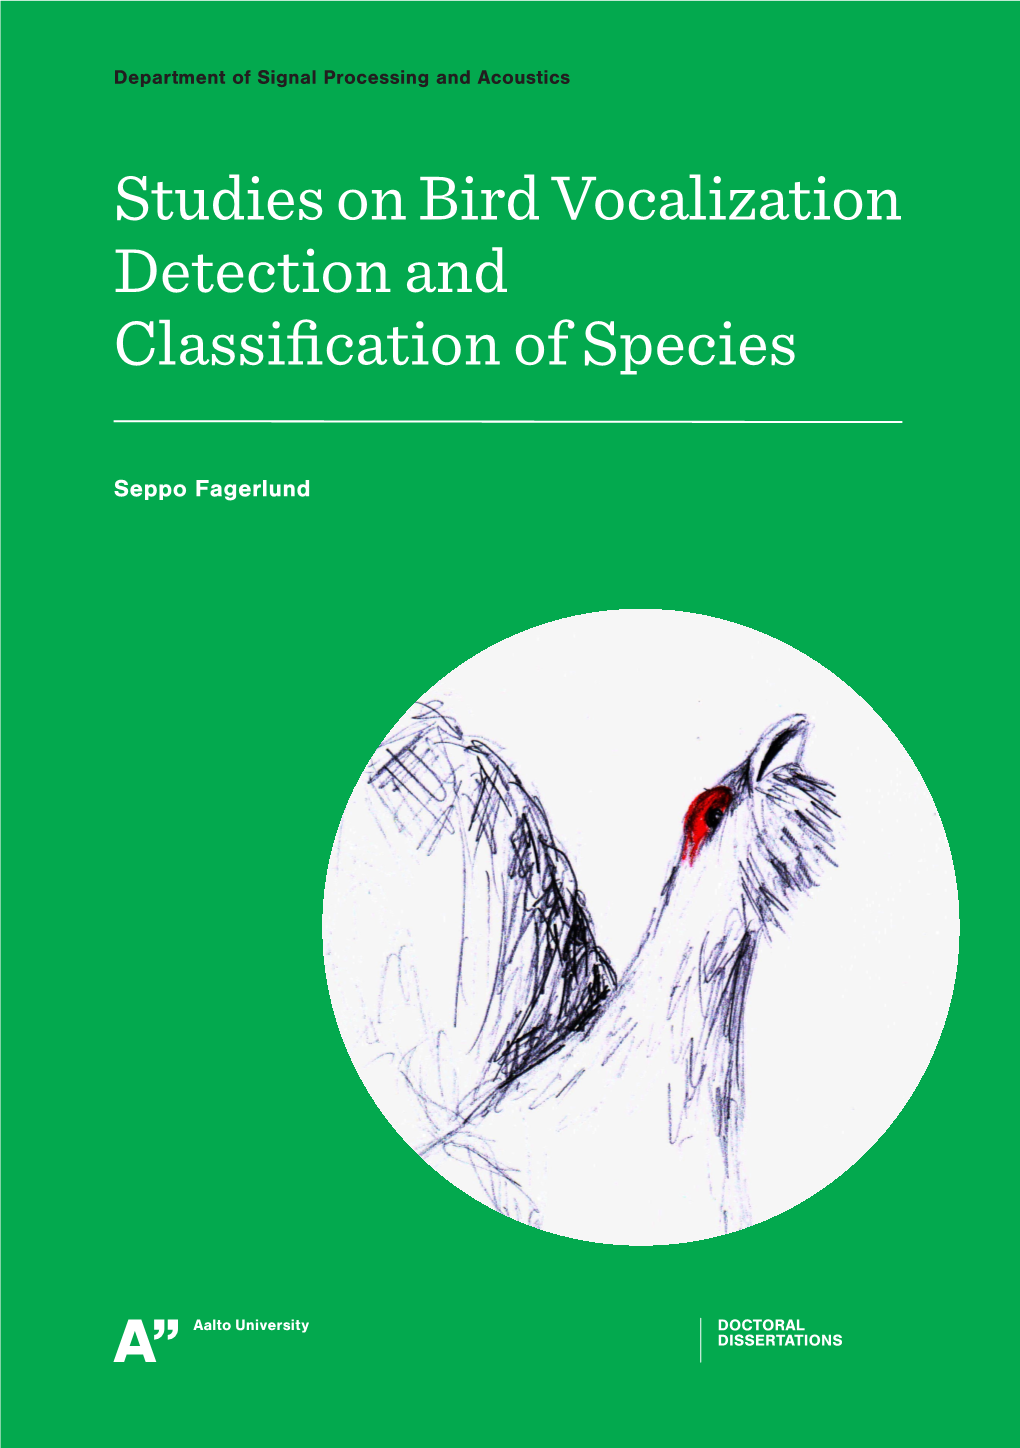 Studies on Bird Vocalization Detection and Classification of Species